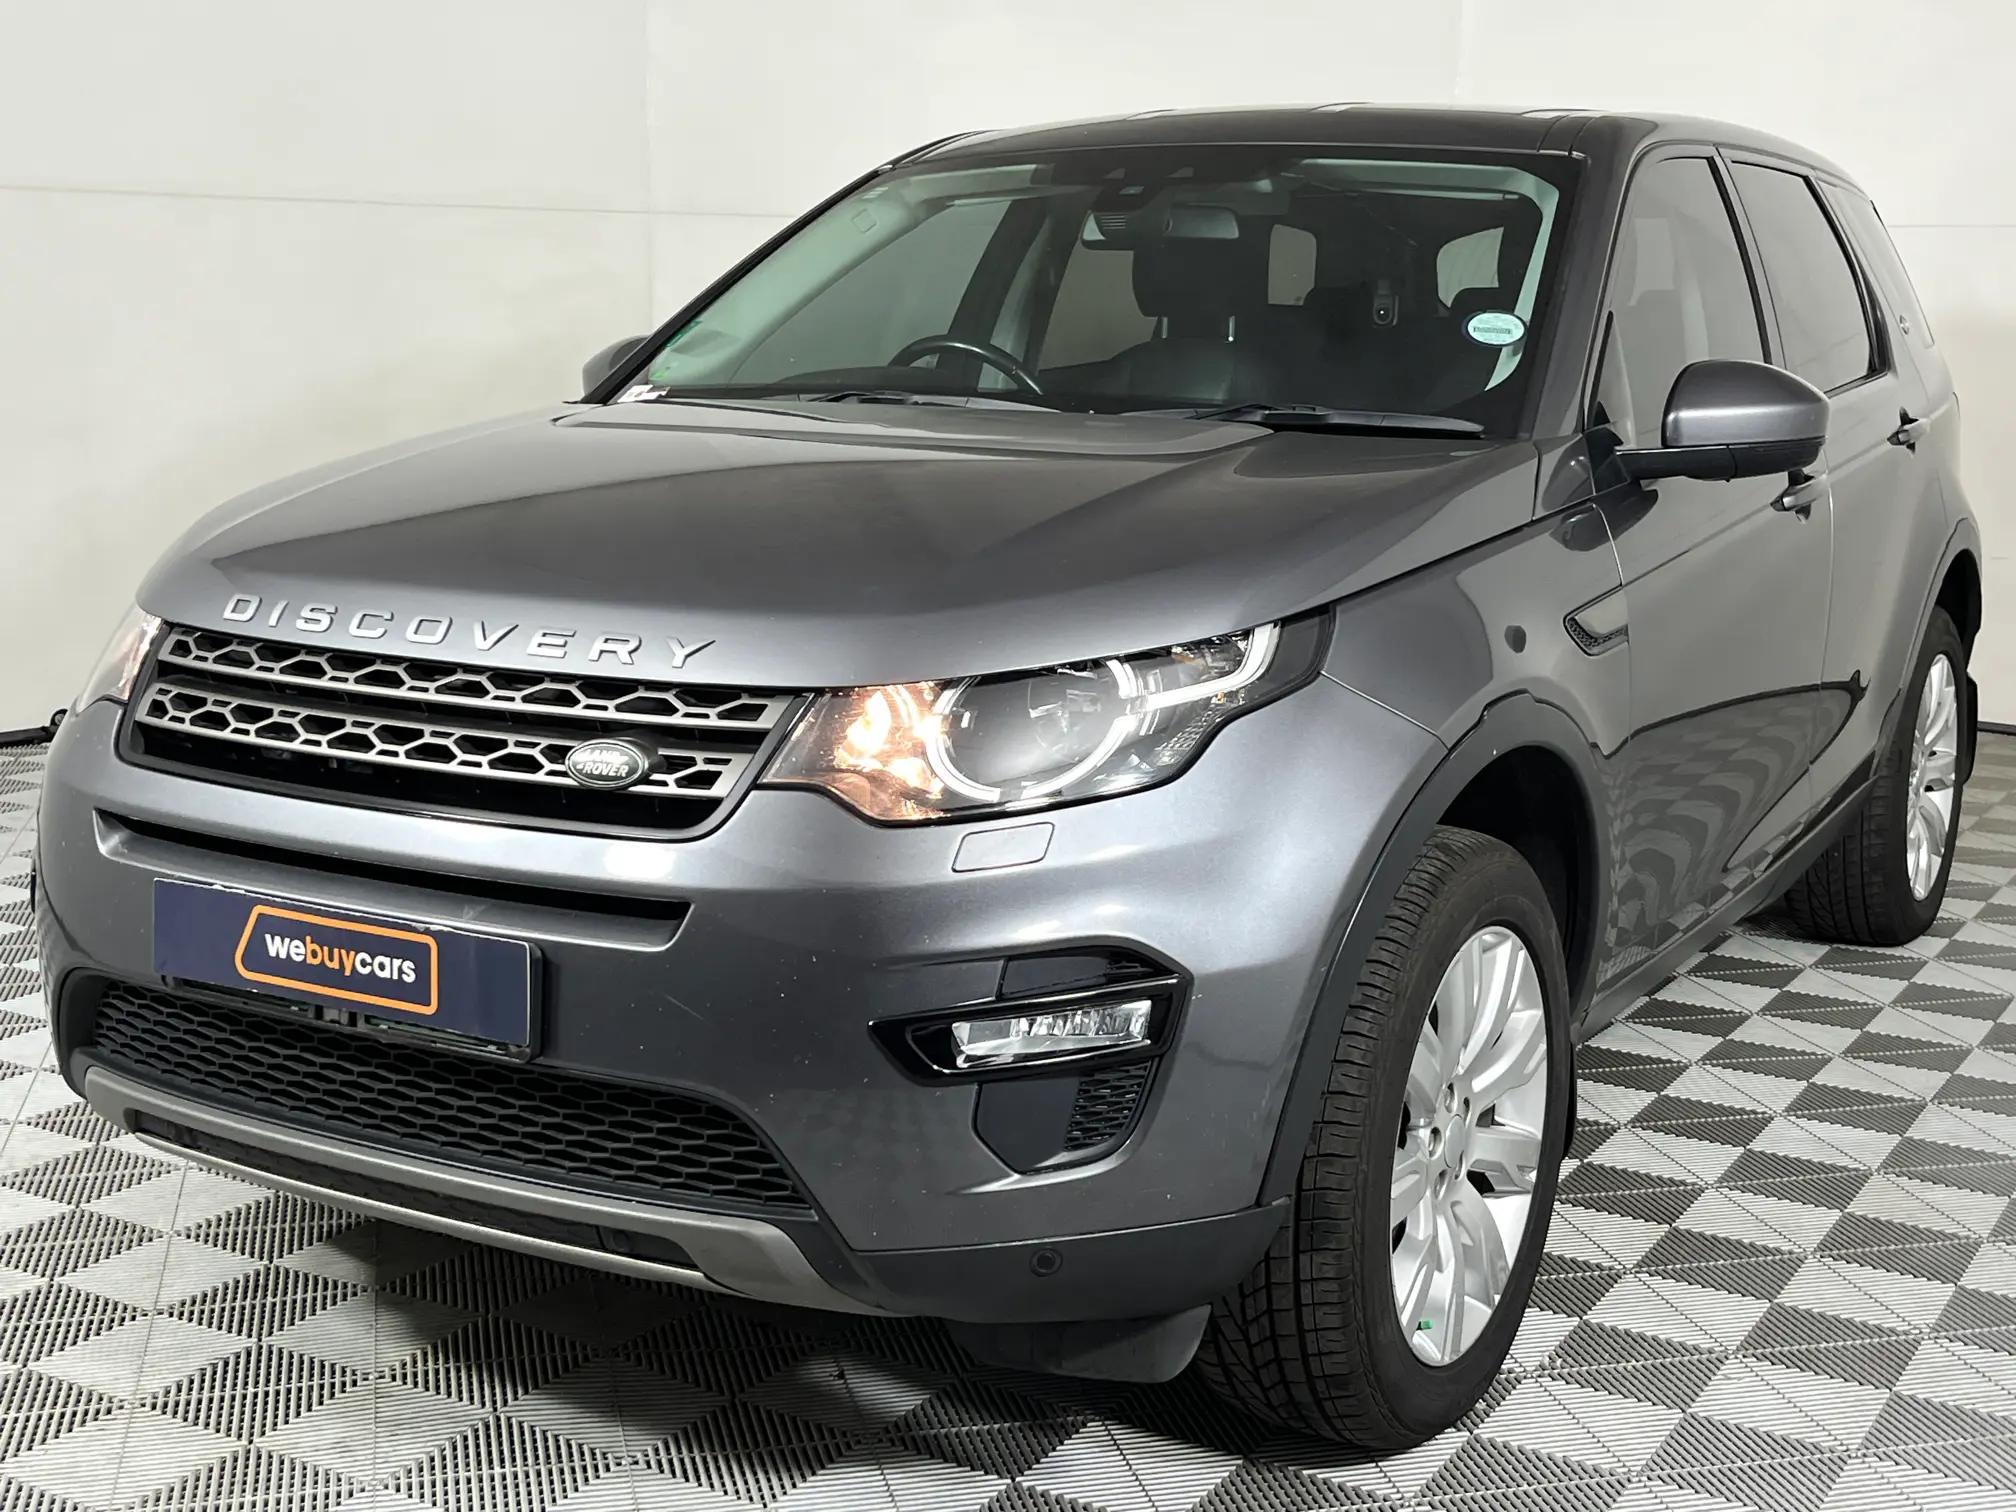 Land Rover Discovery Sport 2.0i4 D SE